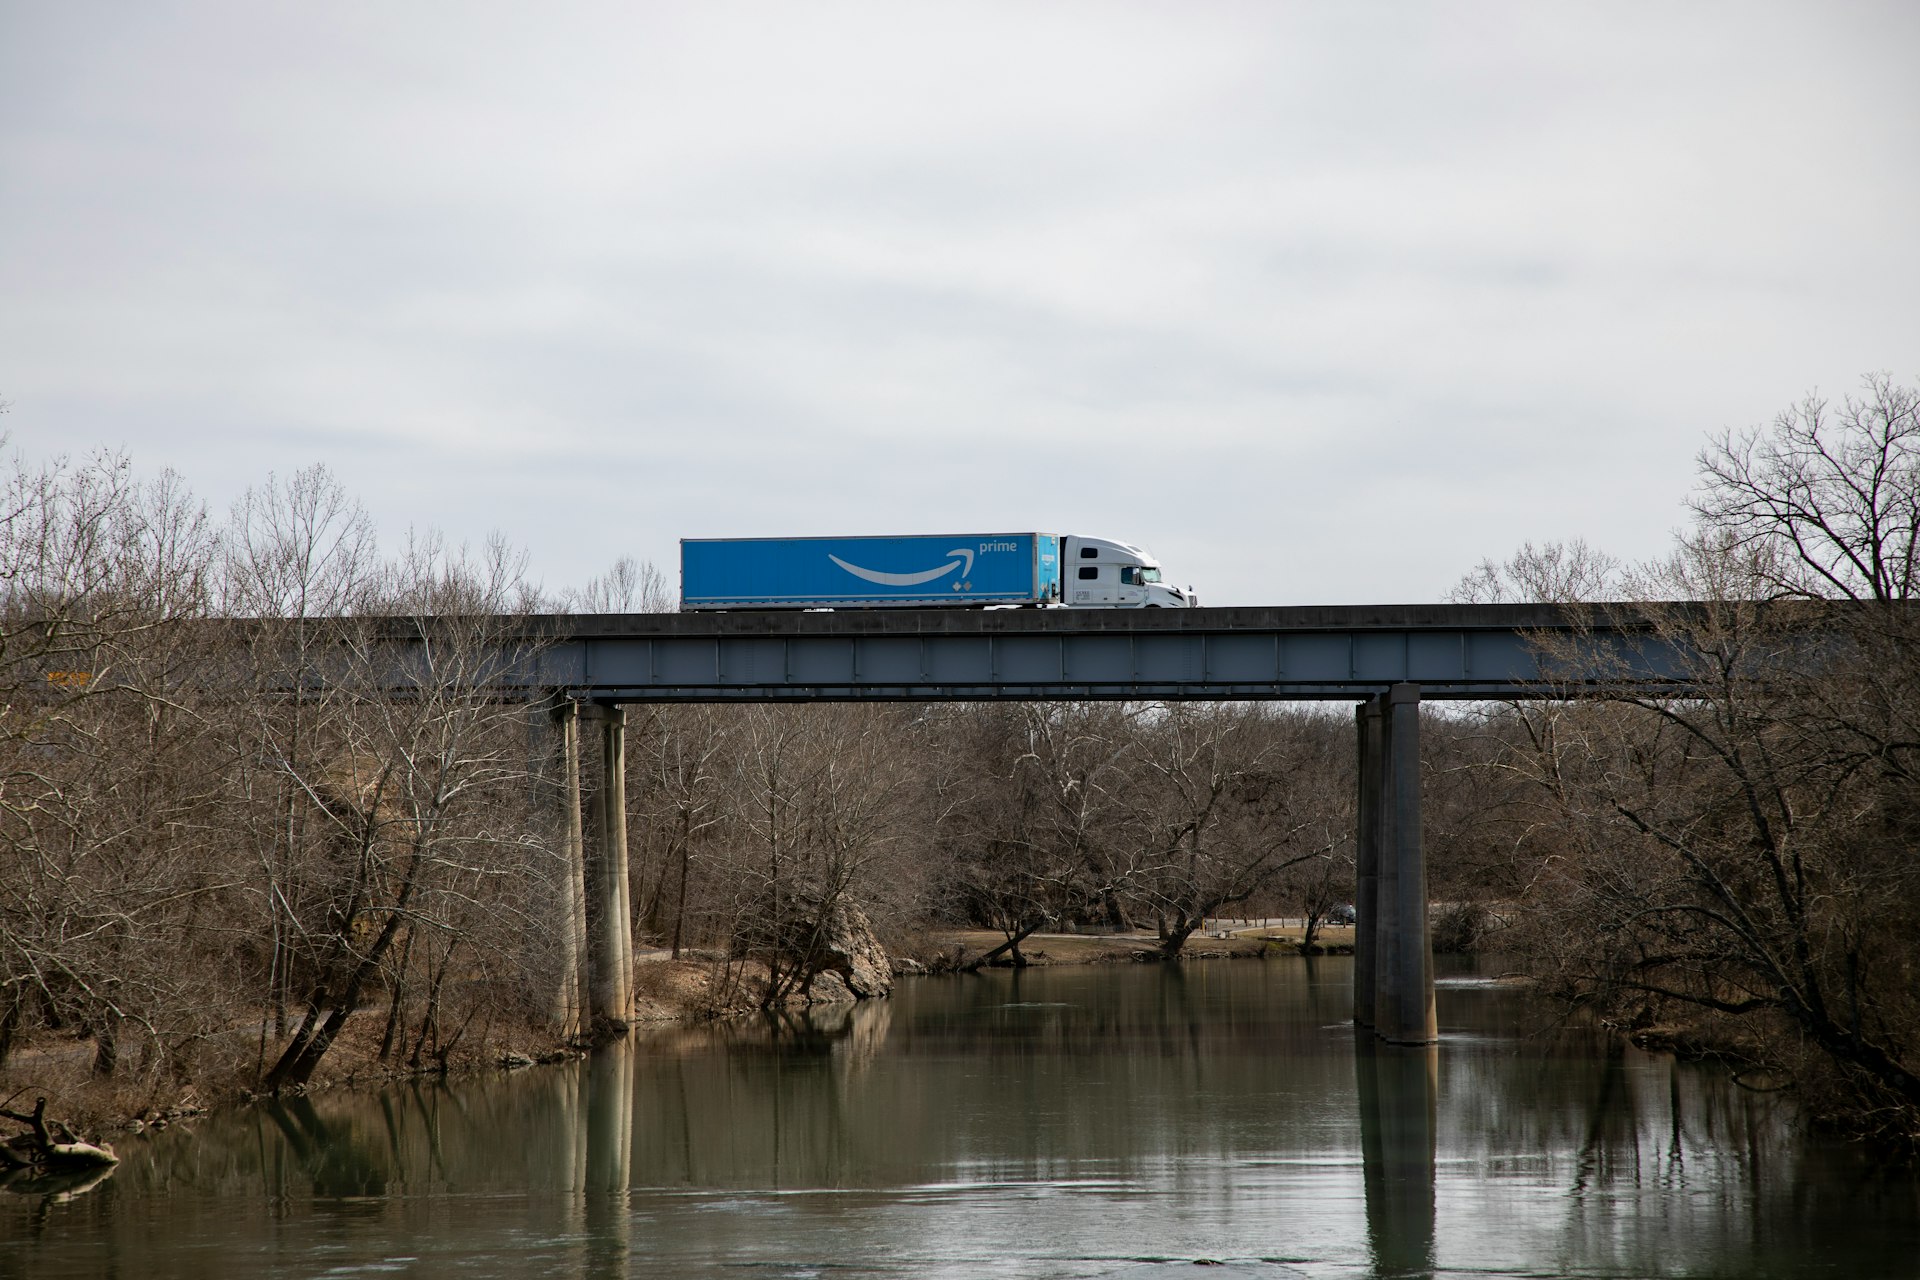 An Amazon Prime semitruck atop a bridge, presumably delivering goods during COVID-19.